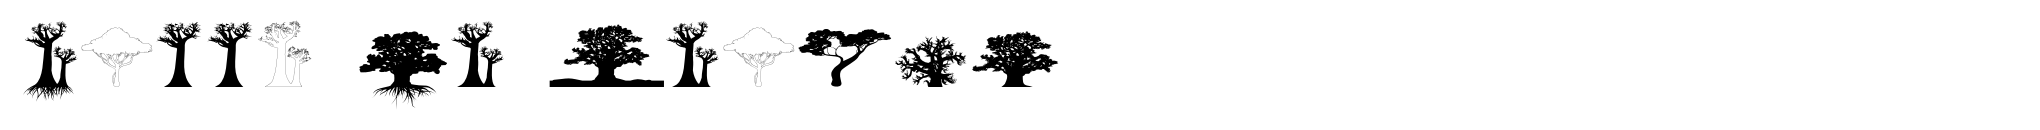 Trees Of Africa image